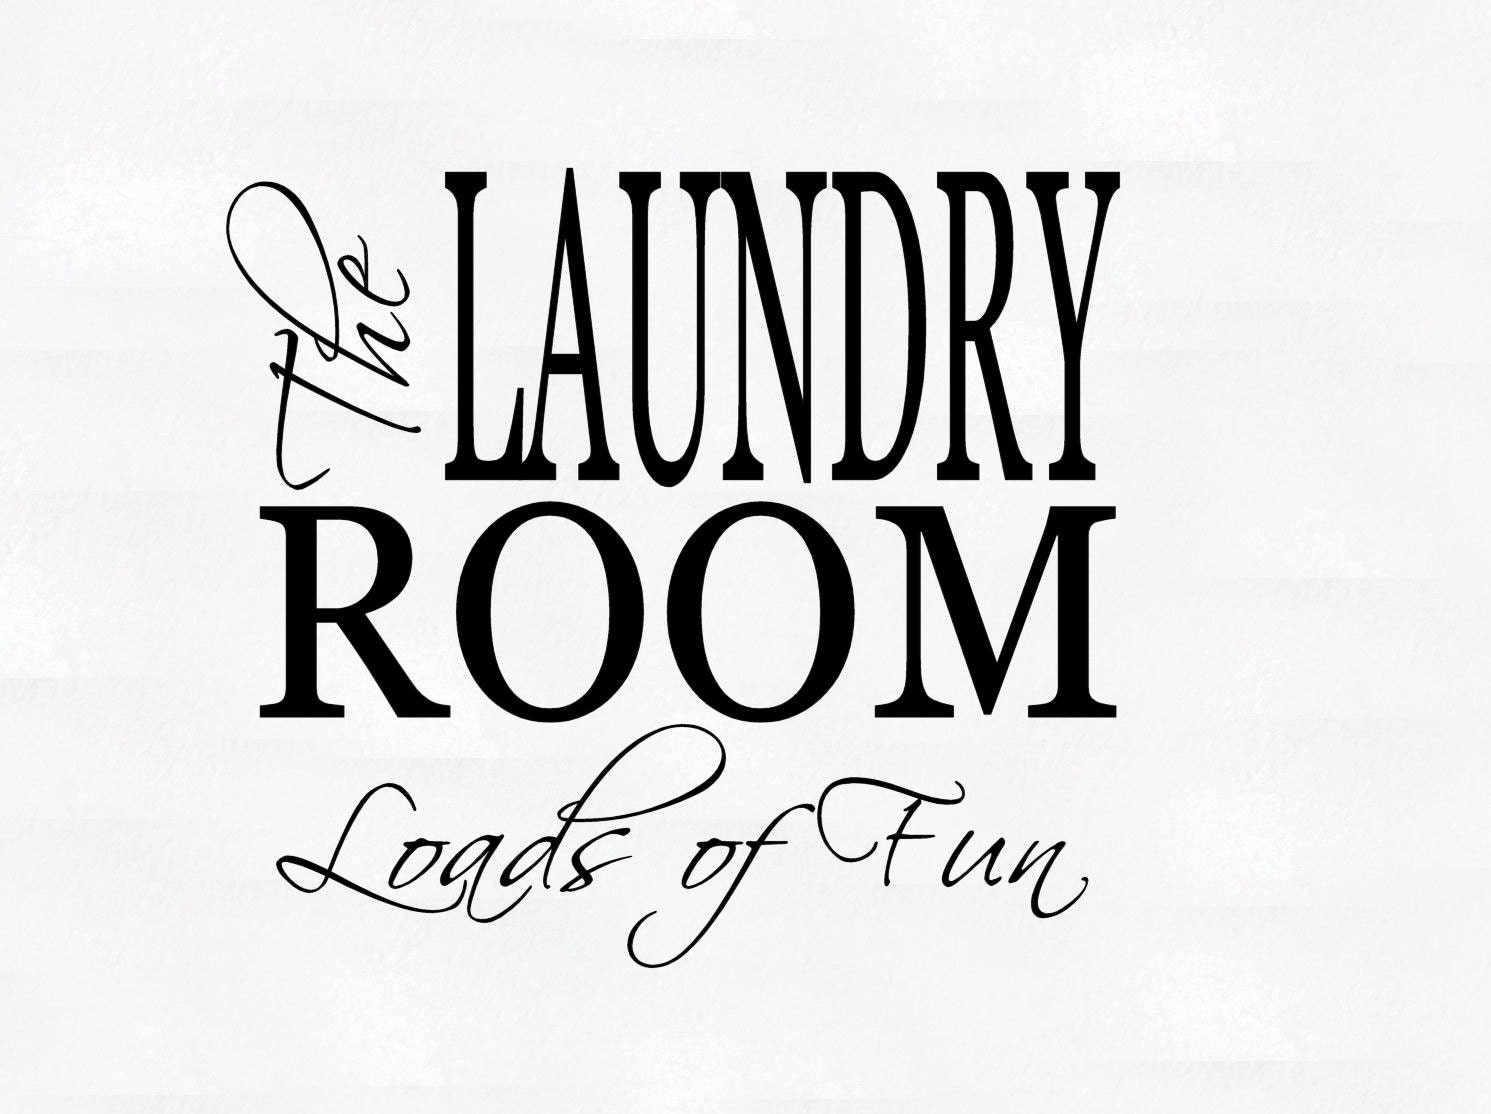 The laundry room loads of fun vinyl wall decal